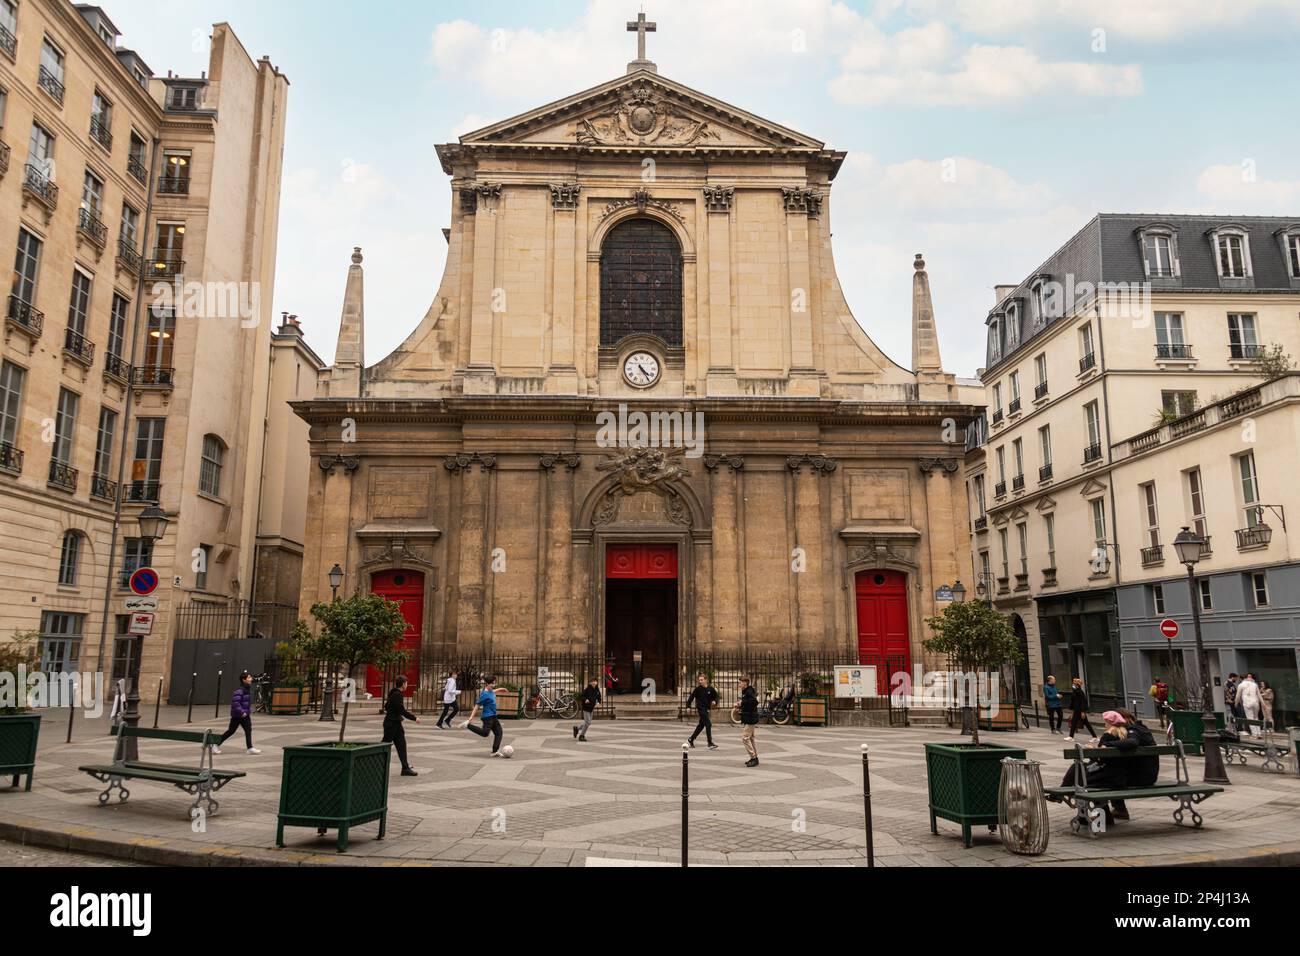 Boys playing football in front of the Basilica of Notre-Dame des Victories, in the 2nd Arrondissement Paris. Stock Photo